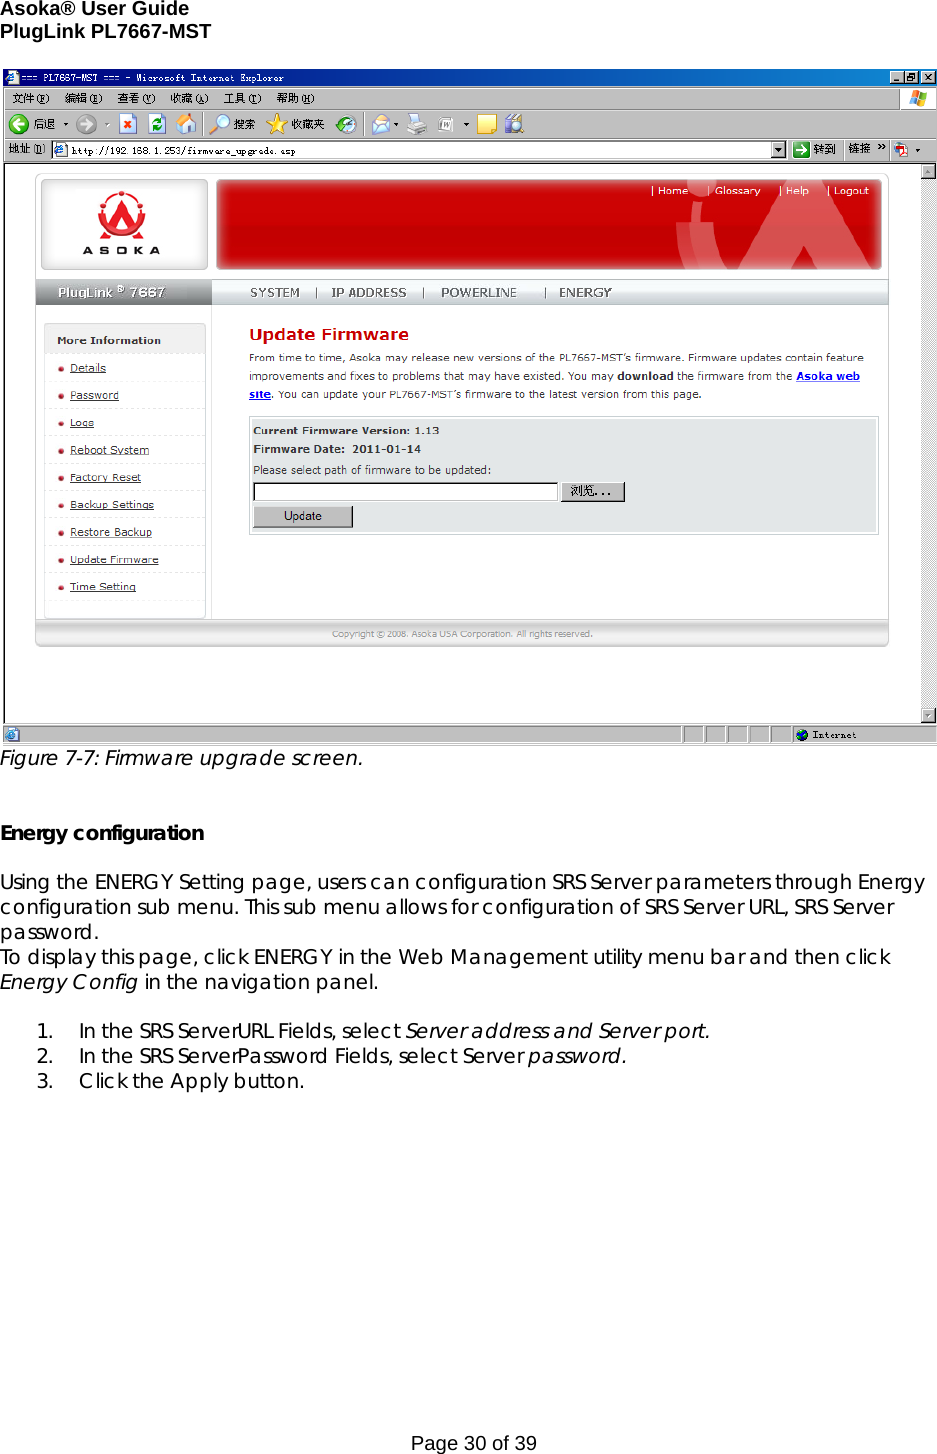 Asoka® User Guide  PlugLink PL7667-MST Page 30 of 39  Figure 7-7: Firmware upgrade screen.   Energy configuration   Using the ENERGY Setting page, users can configuration SRS Server parameters through Energy configuration sub menu. This sub menu allows for configuration of SRS Server URL, SRS Server password. To display this page, click ENERGY in the Web Management utility menu bar and then click Energy Config in the navigation panel.  1. In the SRS ServerURL Fields, select Server address and Server port. 2. In the SRS ServerPassword Fields, select Server password. 3. Click the Apply button.   